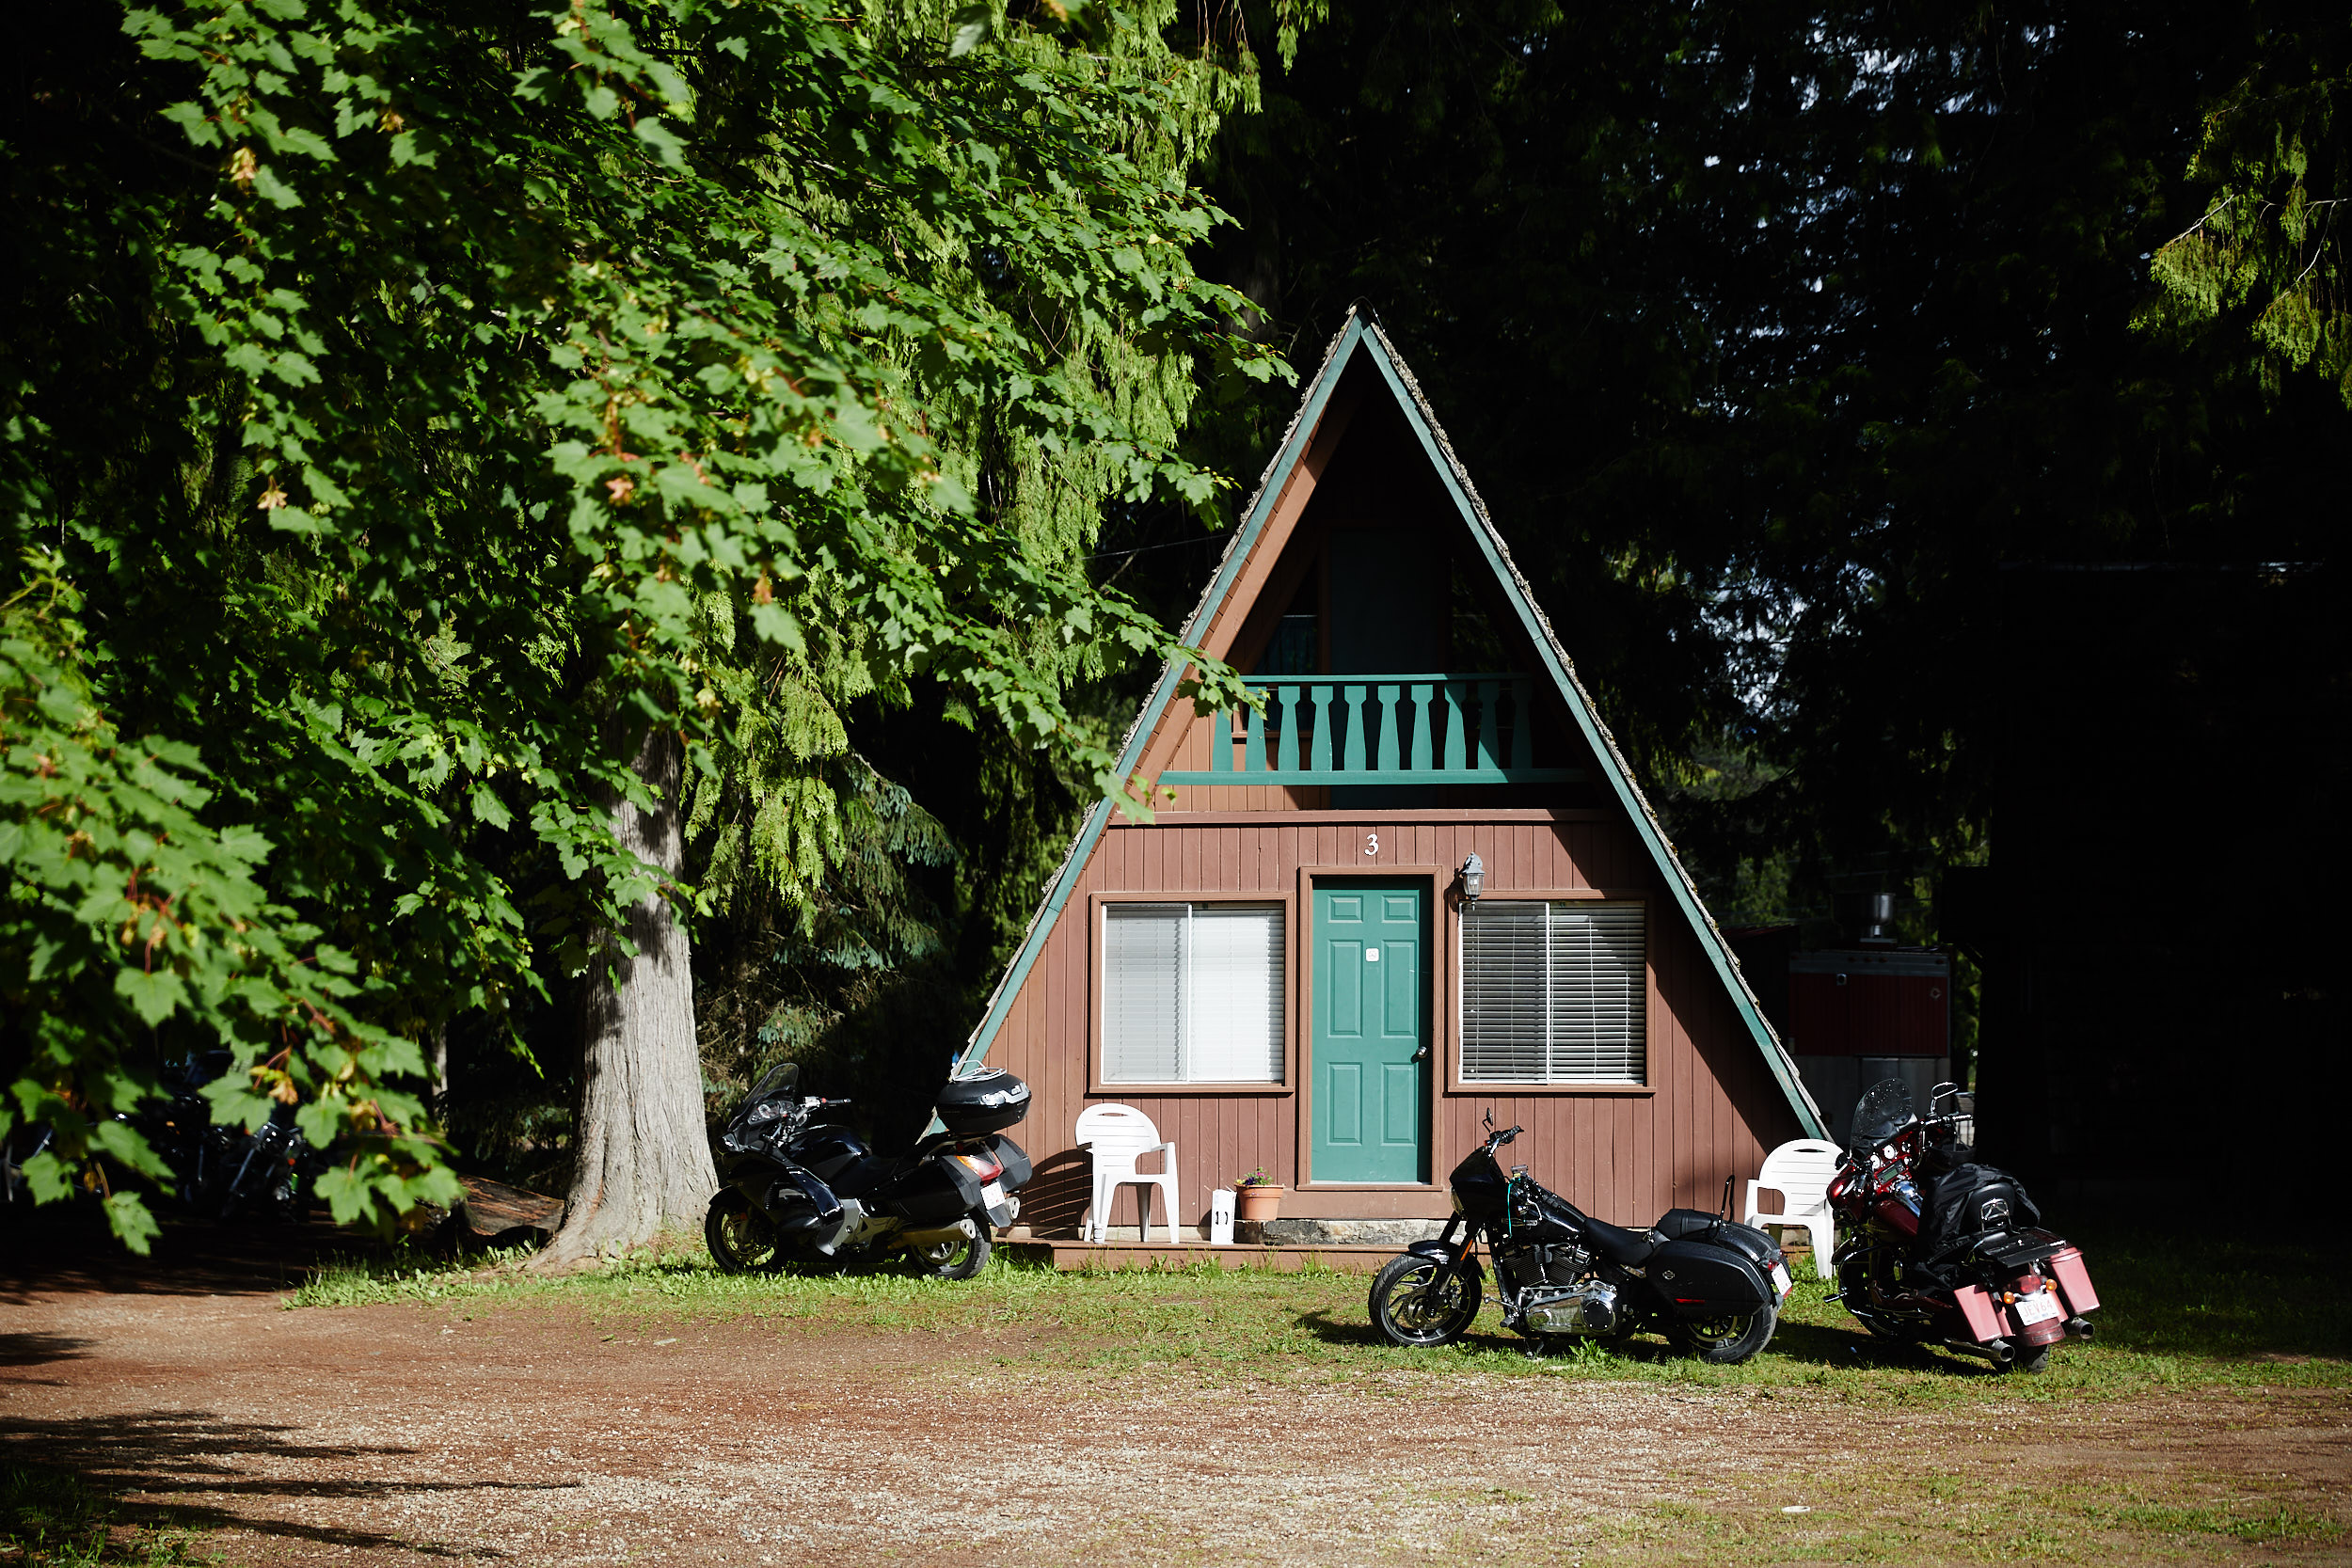  That night we stayed in one of these cool little lodges near Kootenay Lake. There also happened to be some sort of motorcycle gathering going on at the same time. 